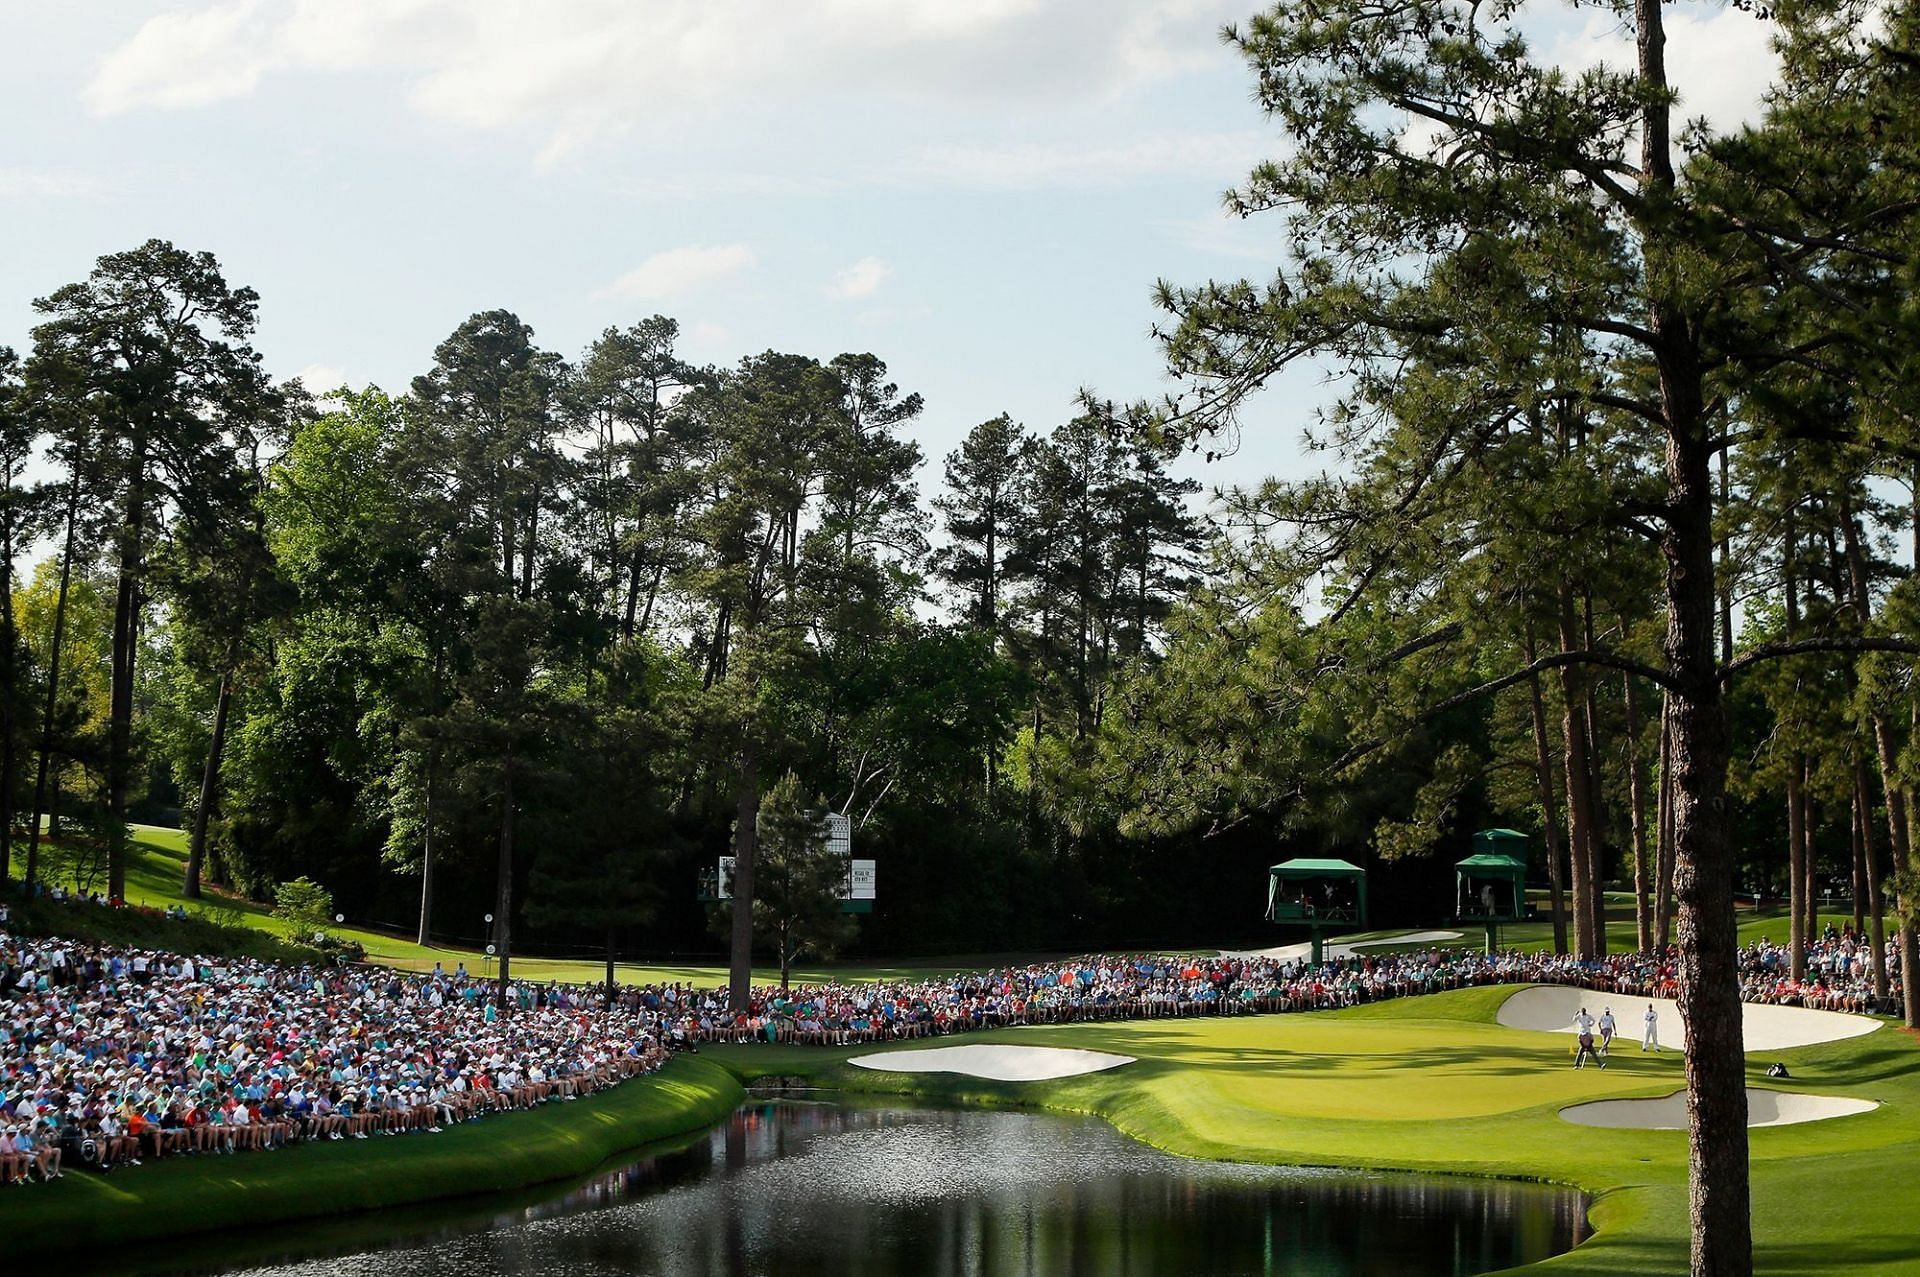 A view of the Augusta National Golf Club